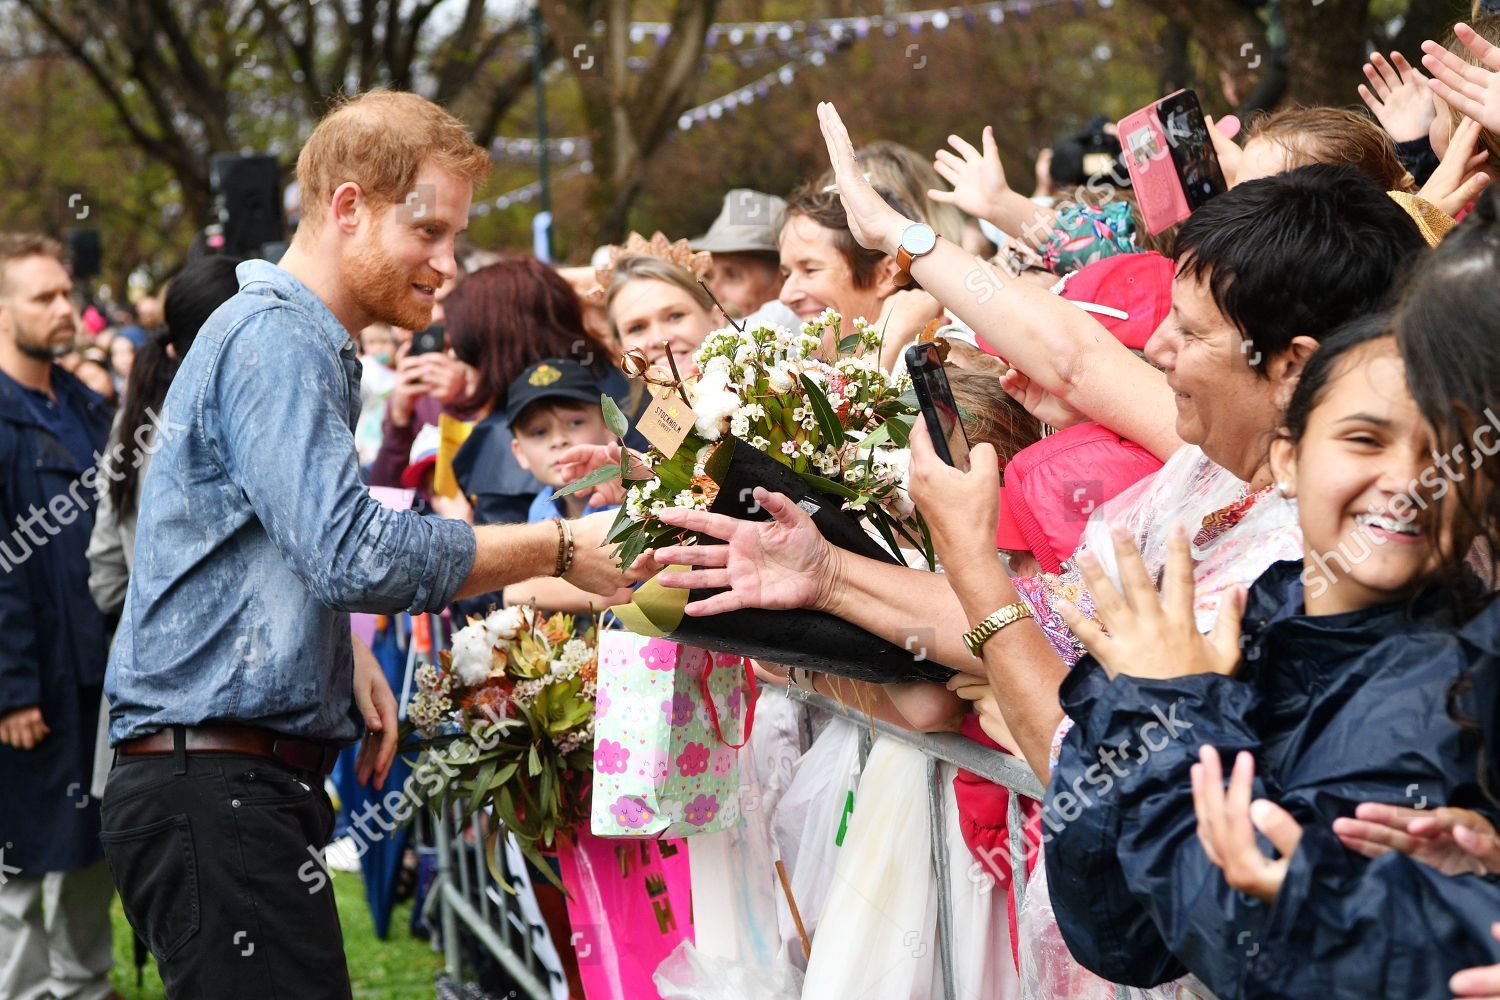 prince-harry-and-meghan-duchess-of-sussex-tour-of-australia-shutterstock-editorial-9934625n.jpg